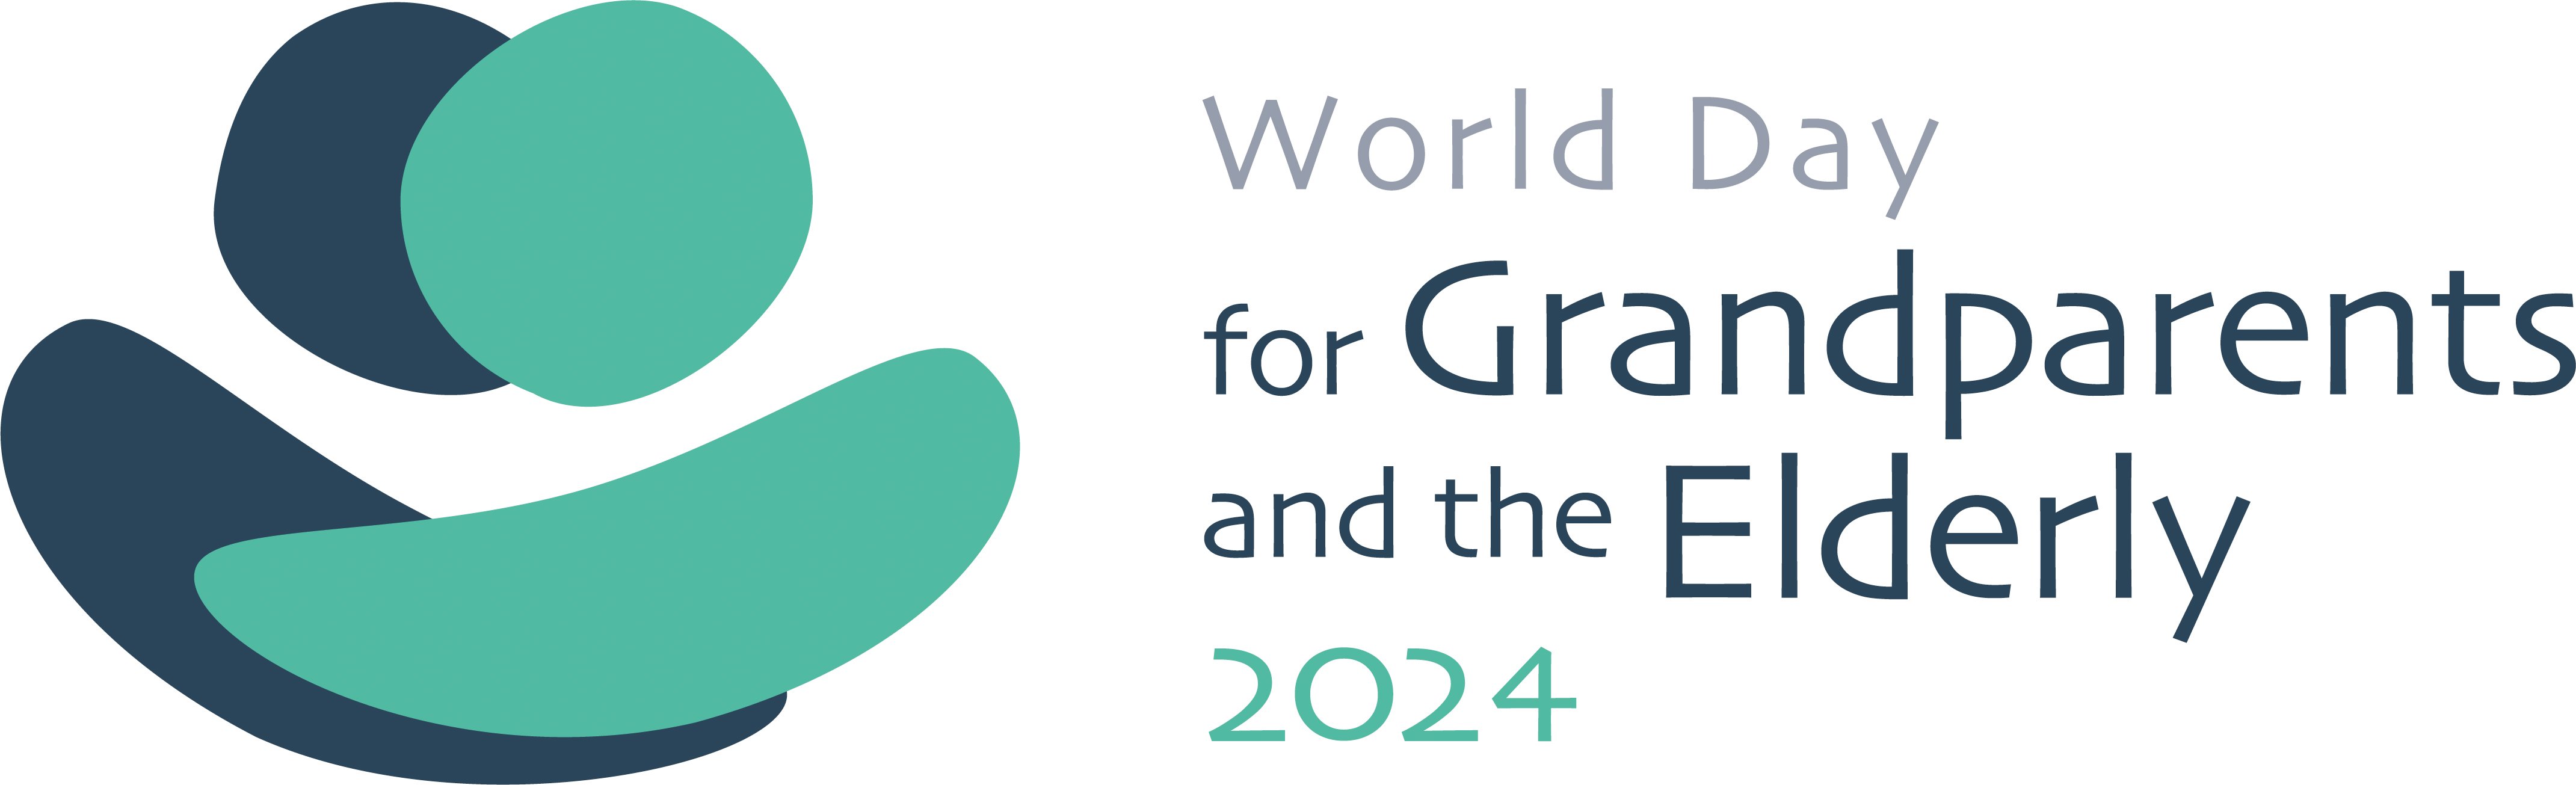 The logo for the World Day for Grandparents and the Elderly 2024.